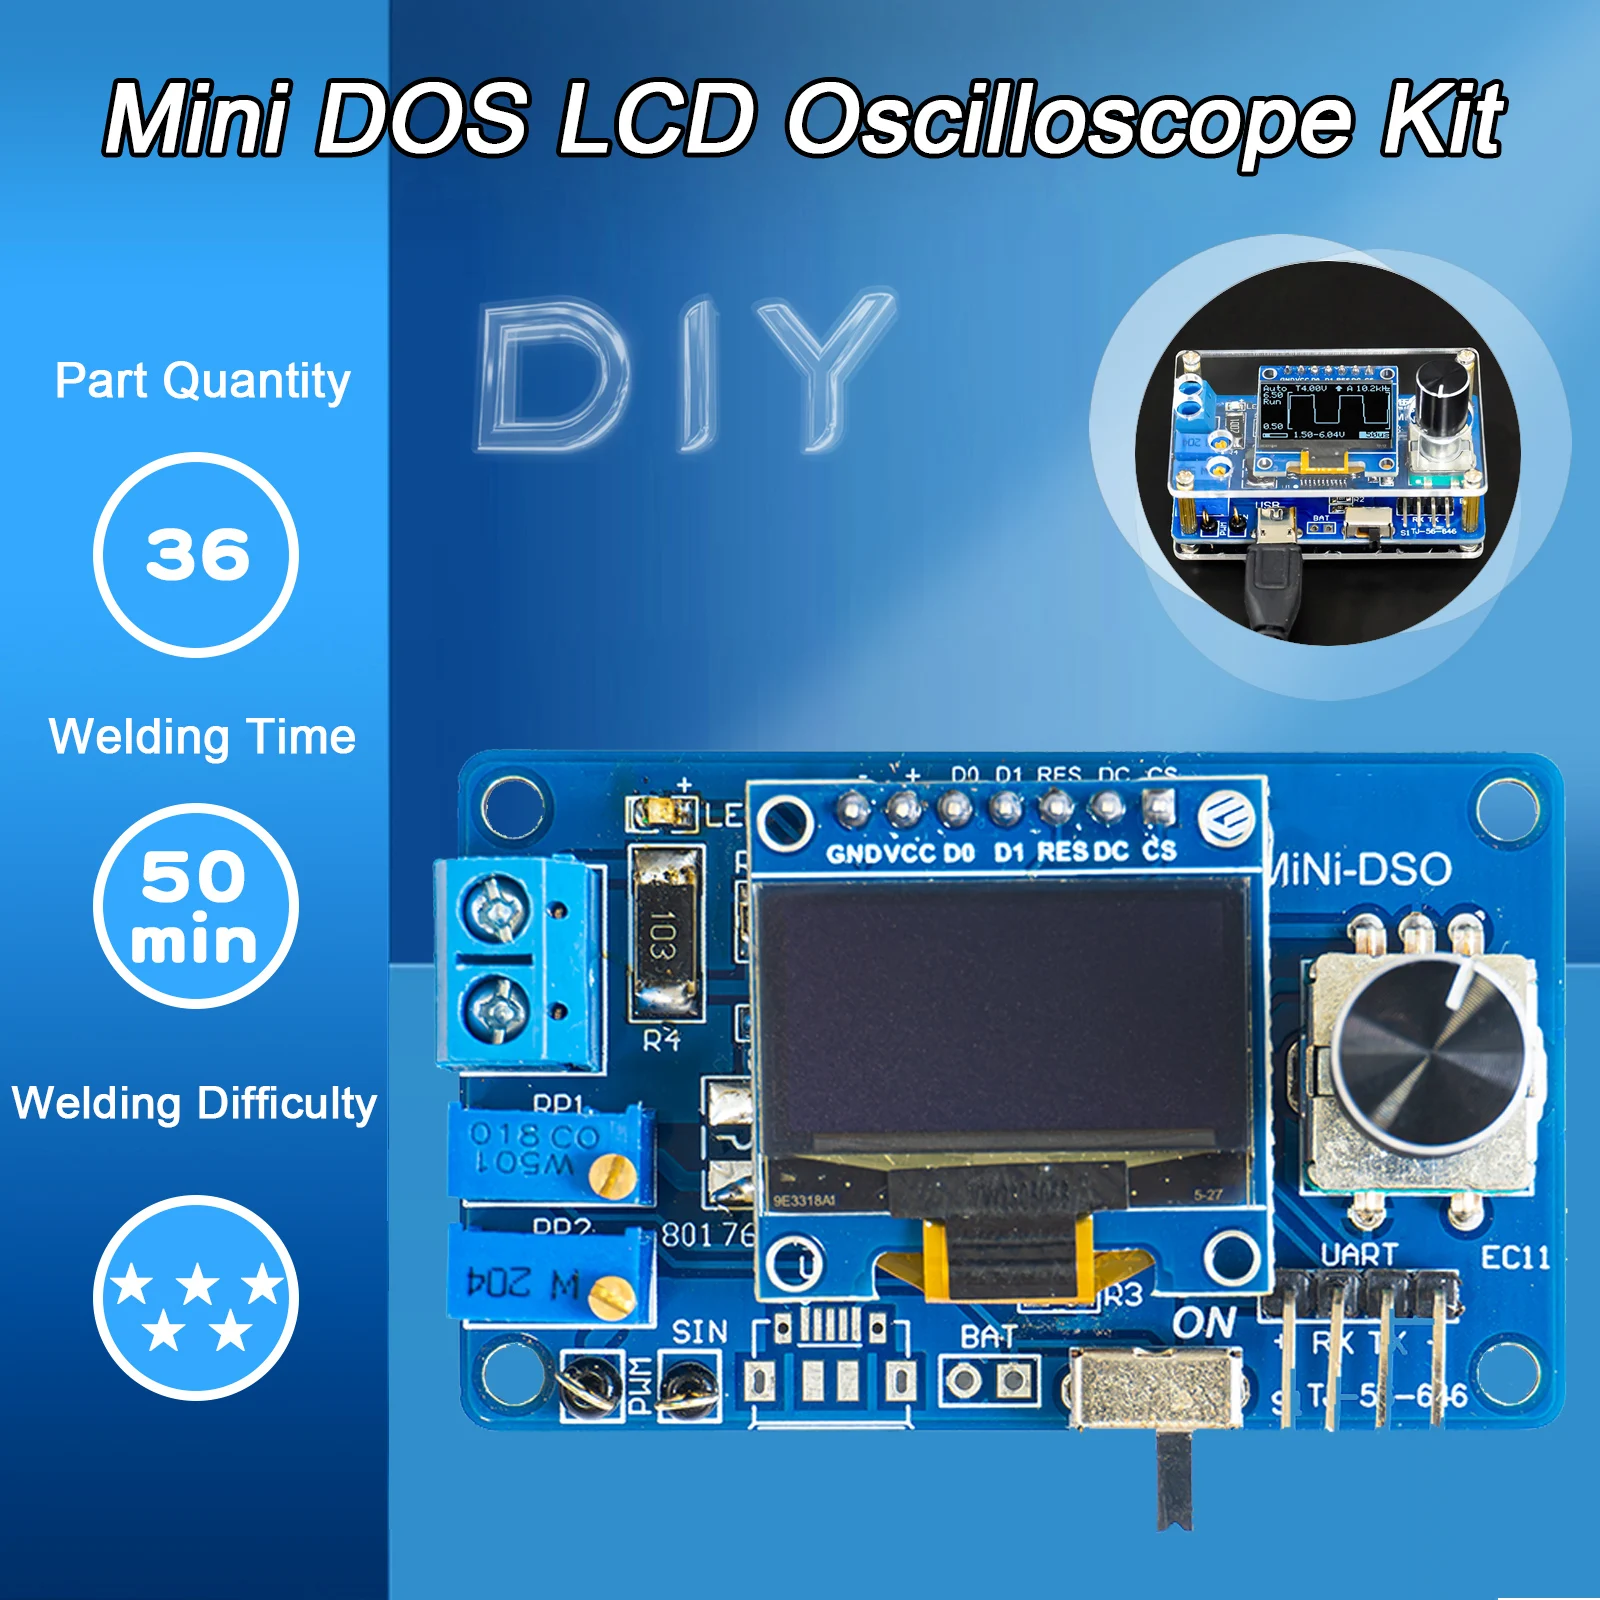 Mini DOS LCD Oscilloscope Kit STC8K8A Single Chip Microcomputer Electronic Welding Training Production of Loose Parts